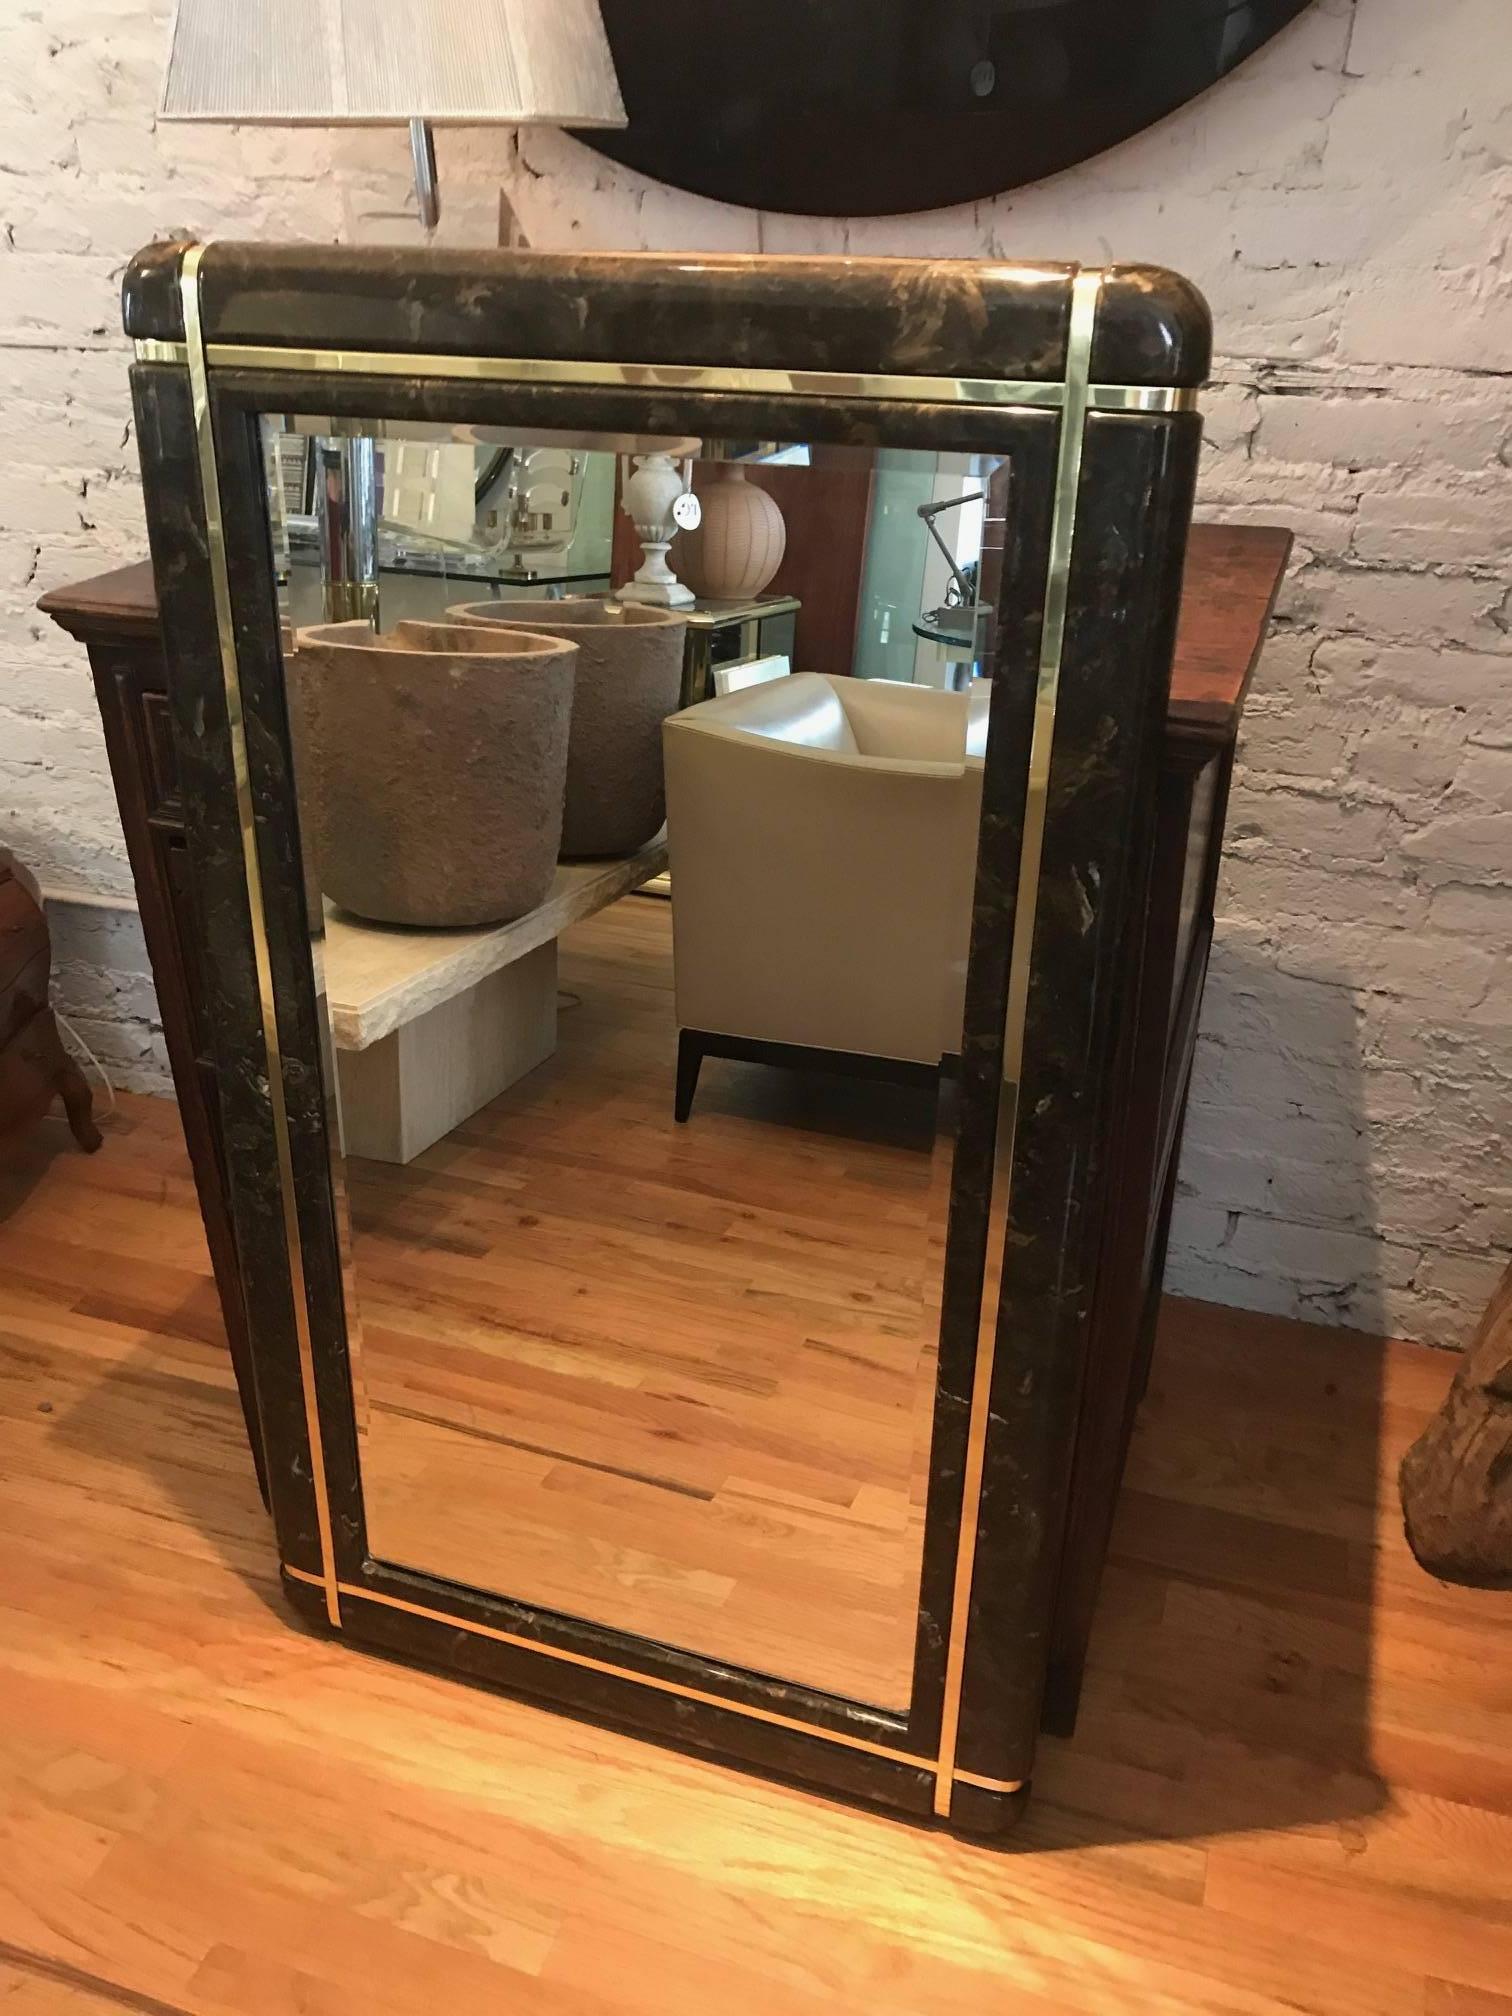 An elegant Karl Springer style mirror with a brown marble frame and brass banding.
Finest quality craftsmanship.